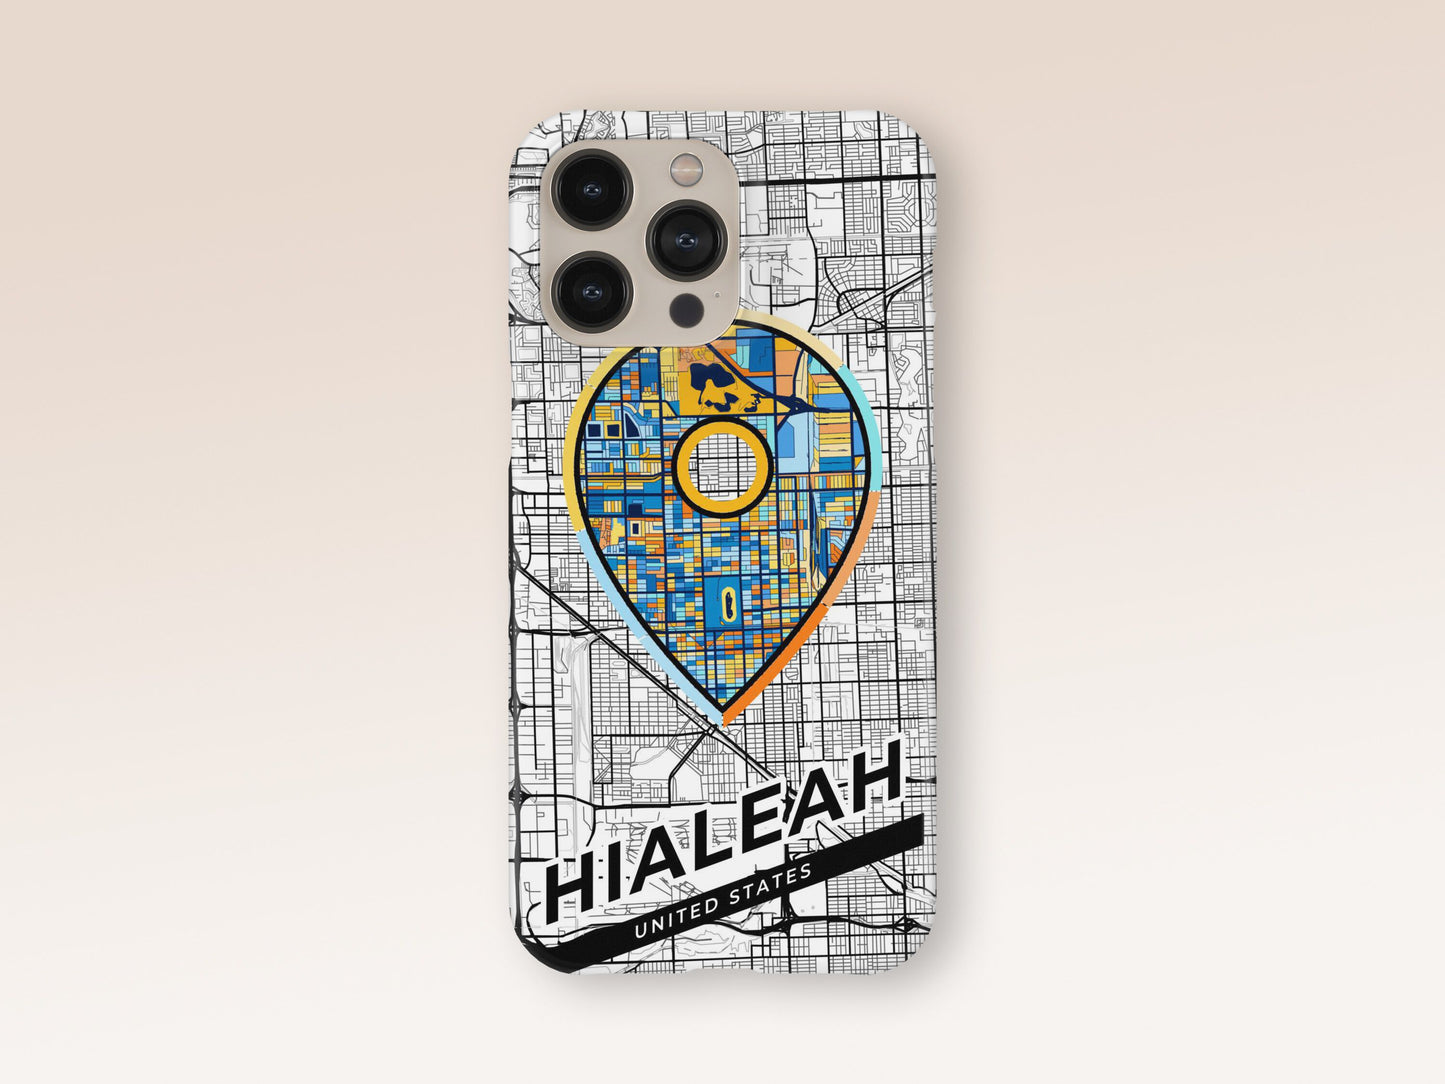 Hialeah Florida slim phone case with colorful icon. Birthday, wedding or housewarming gift. Couple match cases. 1